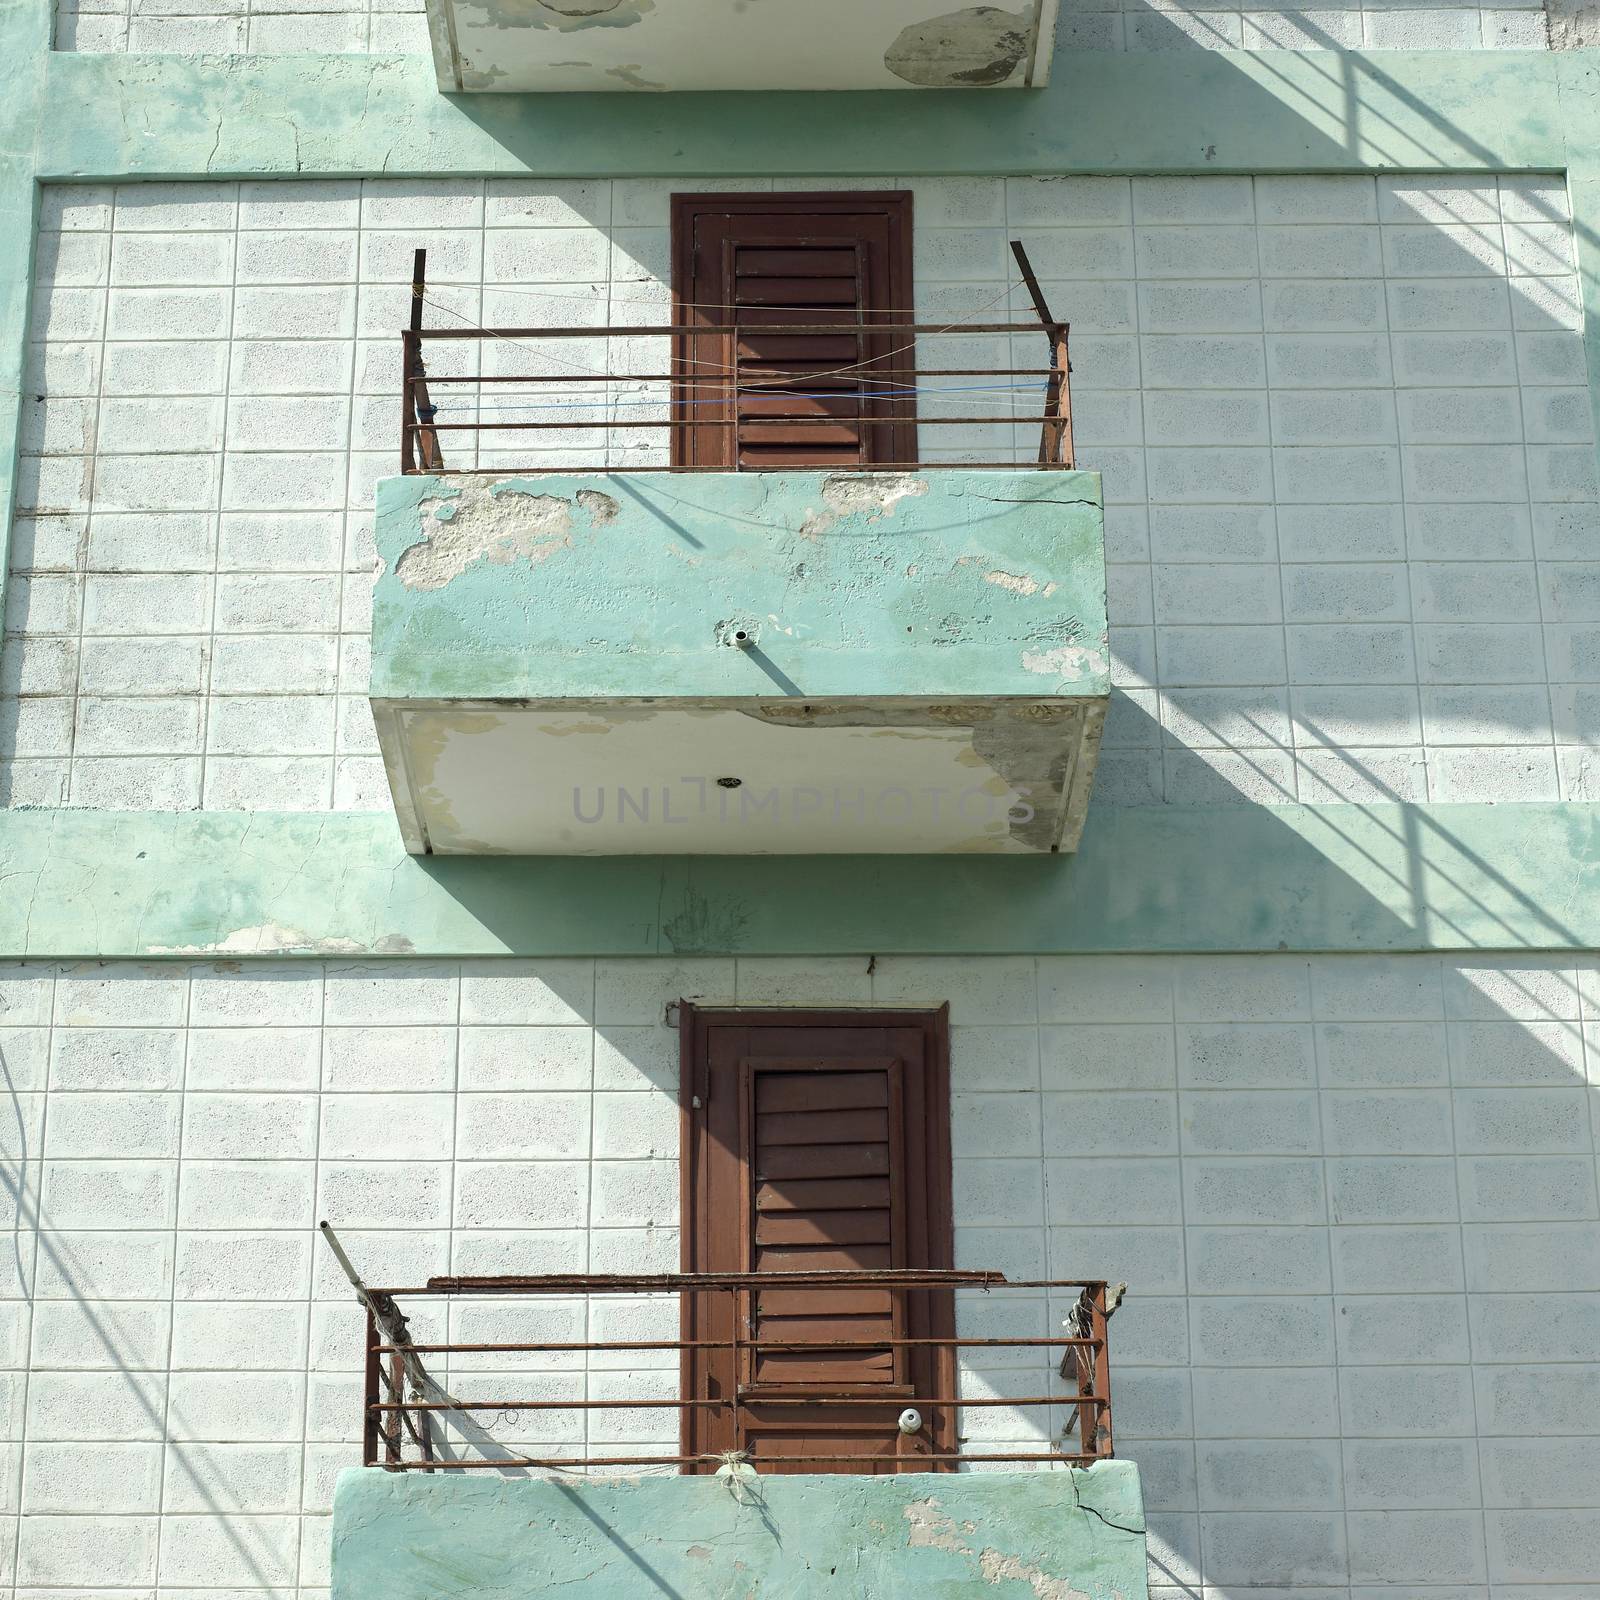 Modest balconies and railings of a low income apartment building 